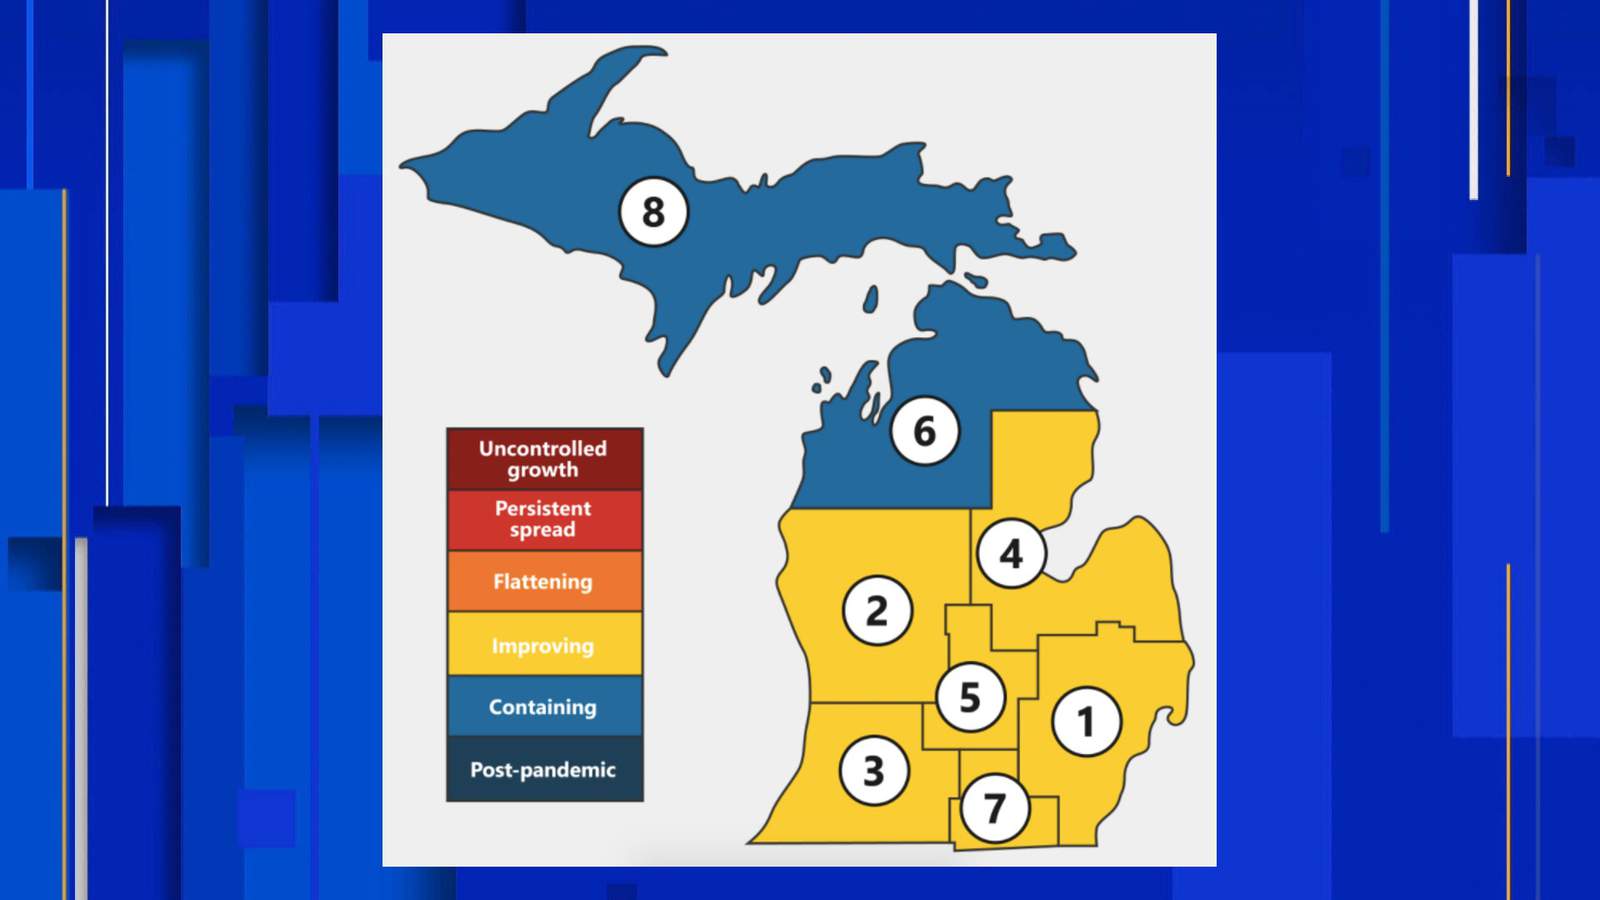 Heres how, where 54 types of activities, services, businesses are restricted in Michigan due to COVID-19